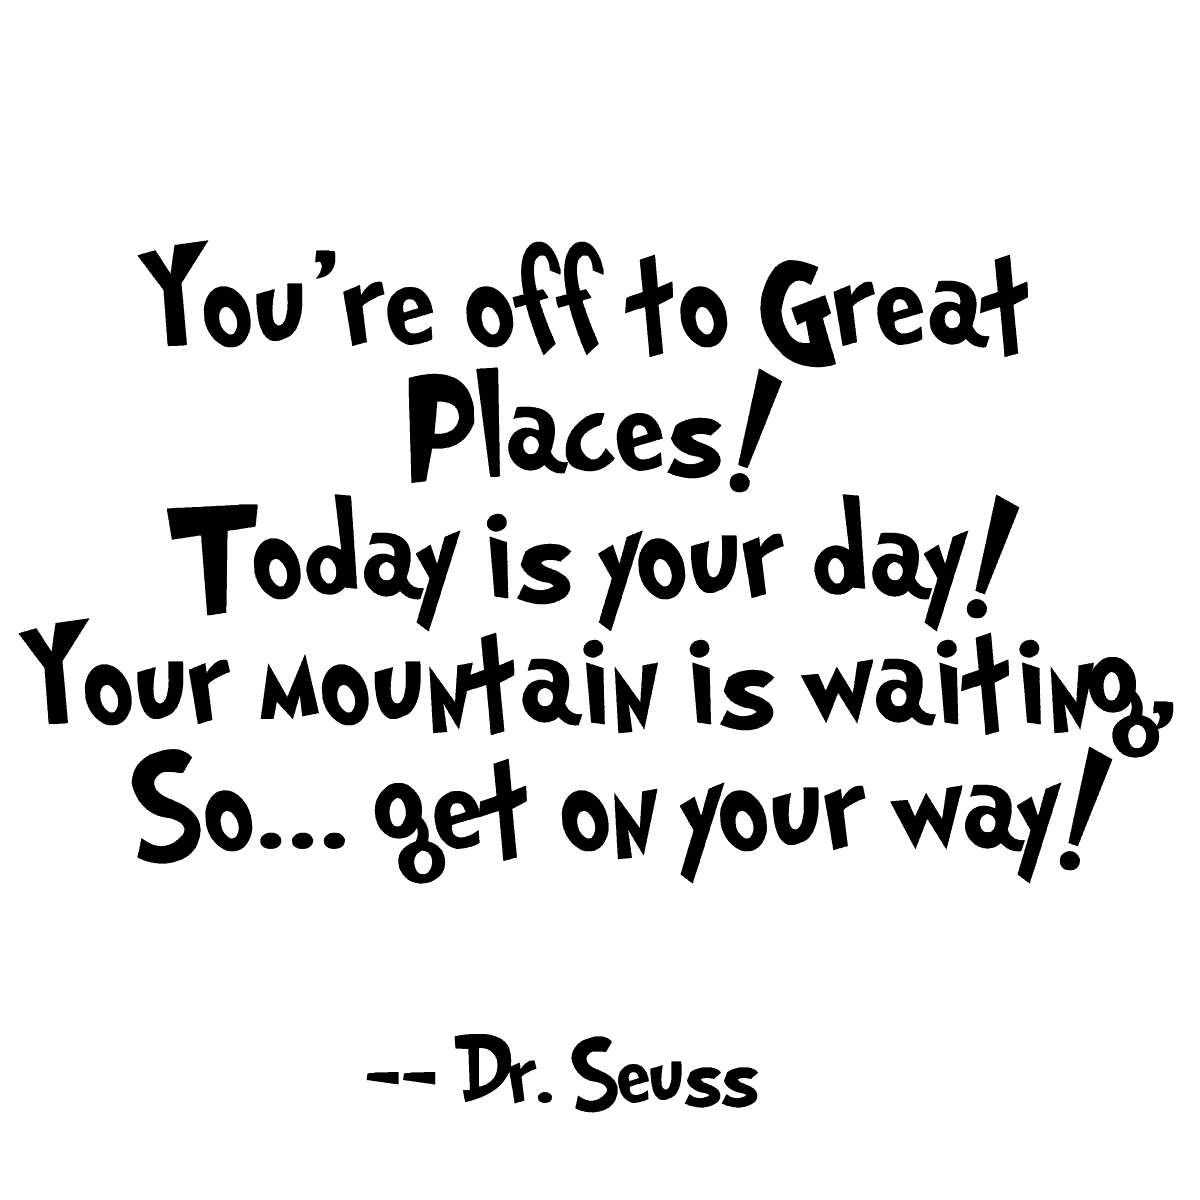 Dr seuss quote life is too shor